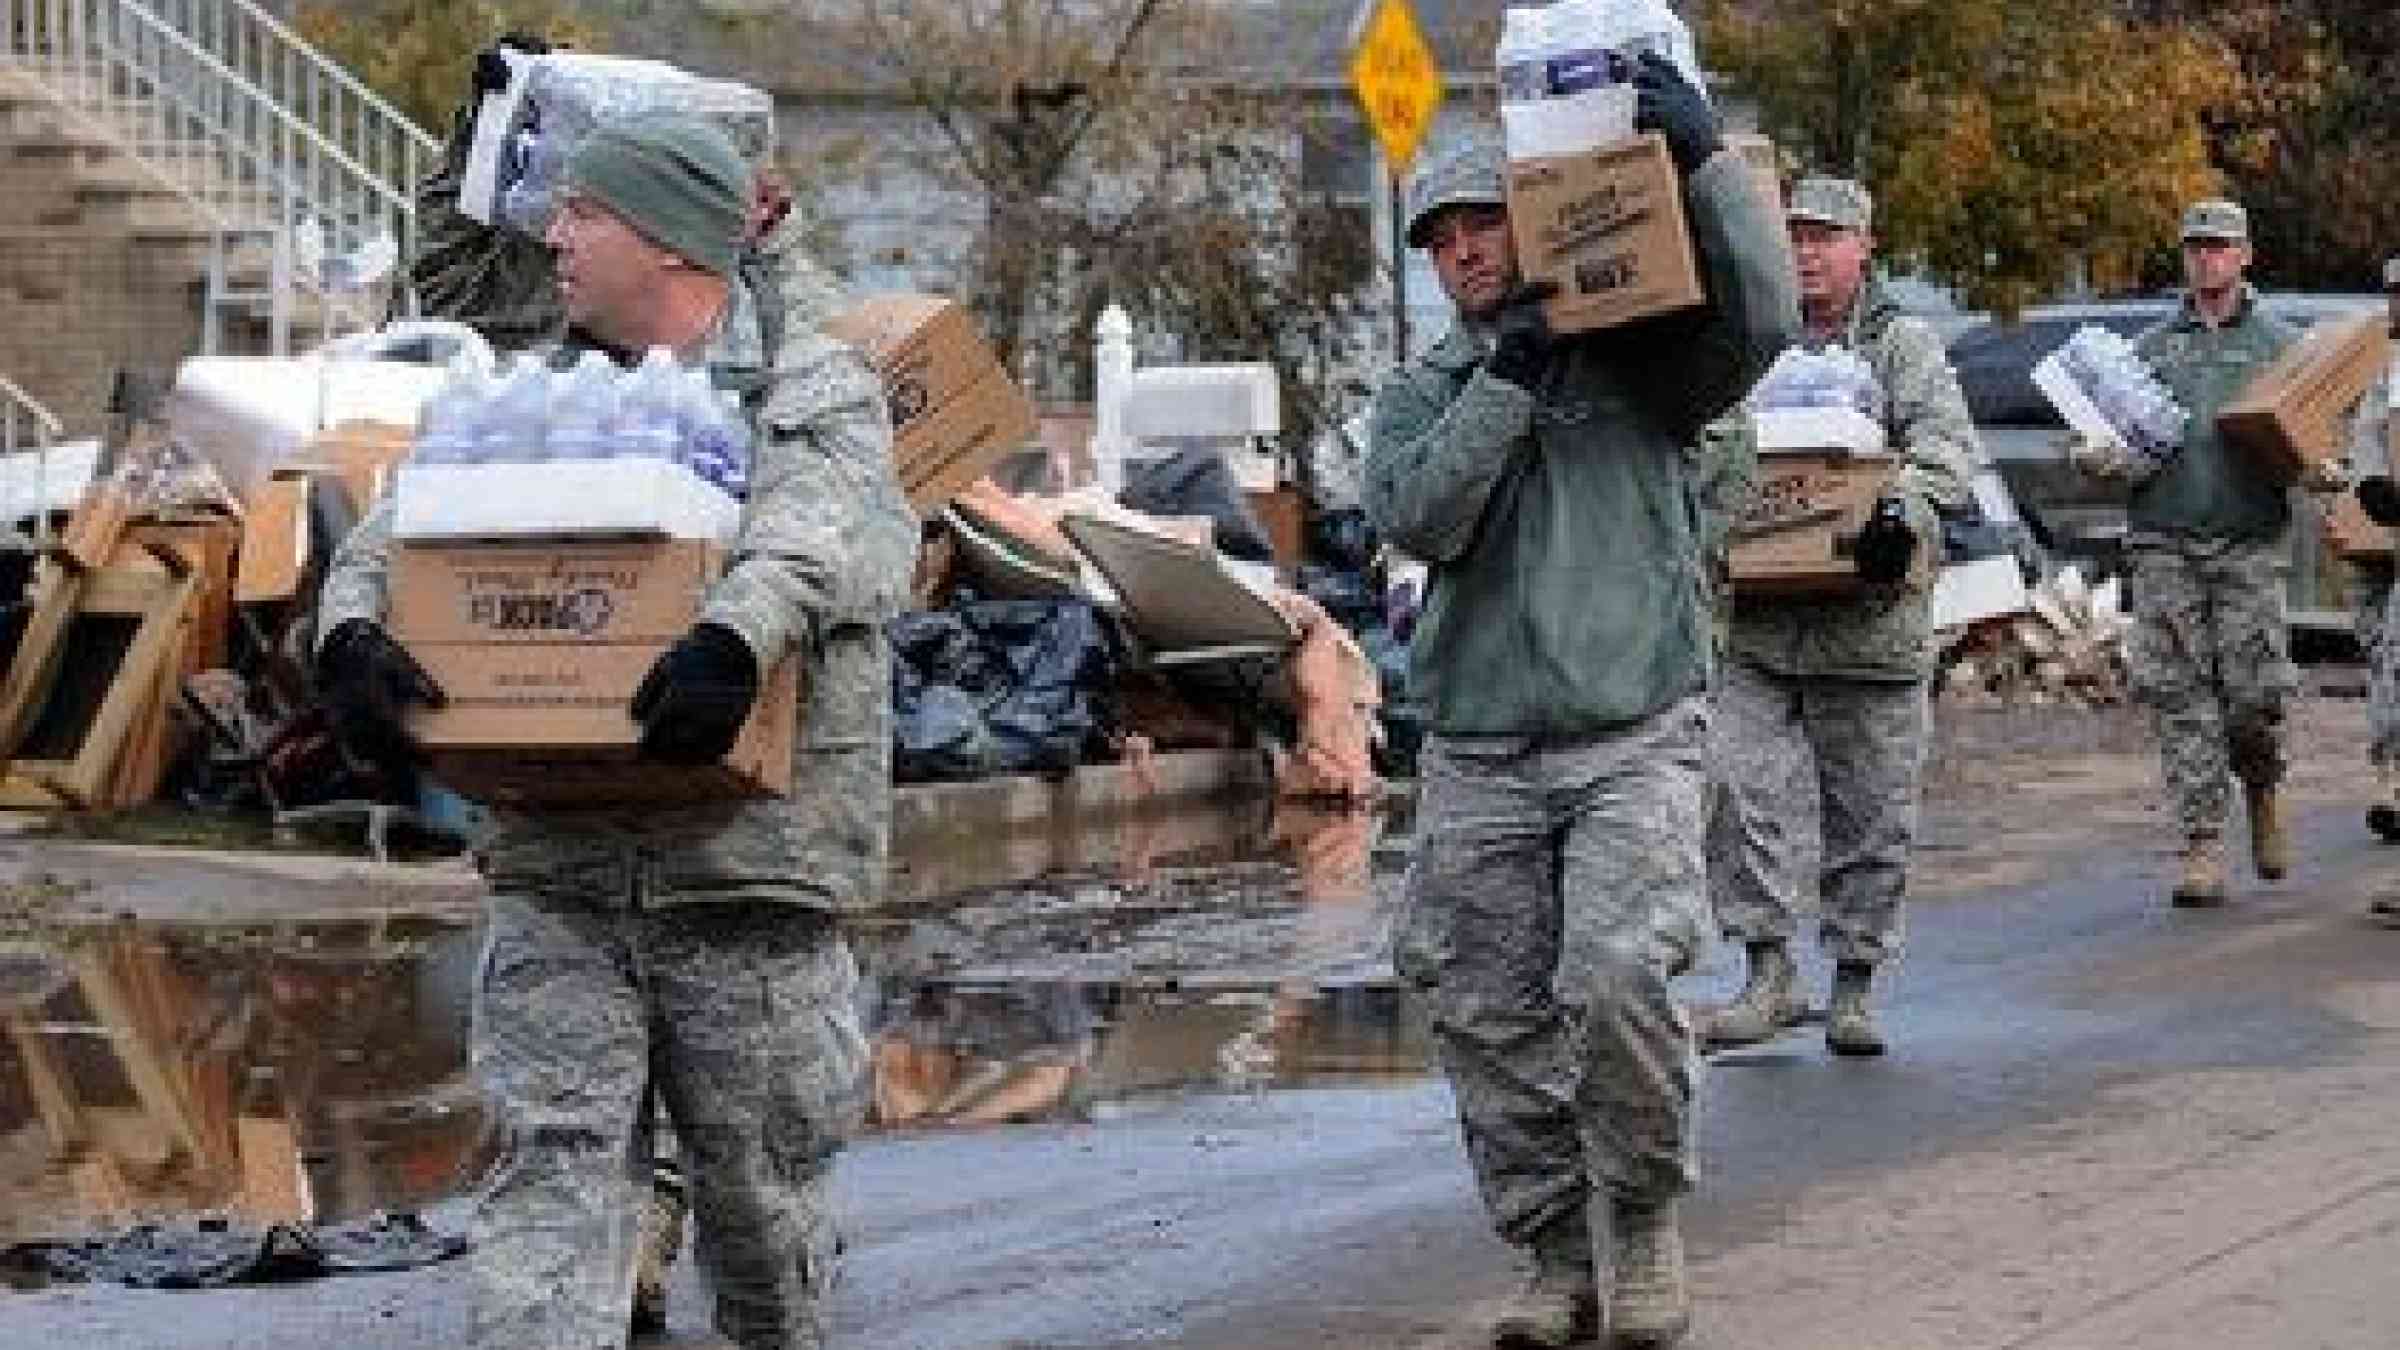 <b>A changing city: </b>New York Air National Guard respond after Sandy, which has prompted a major review of the city's disaster management.